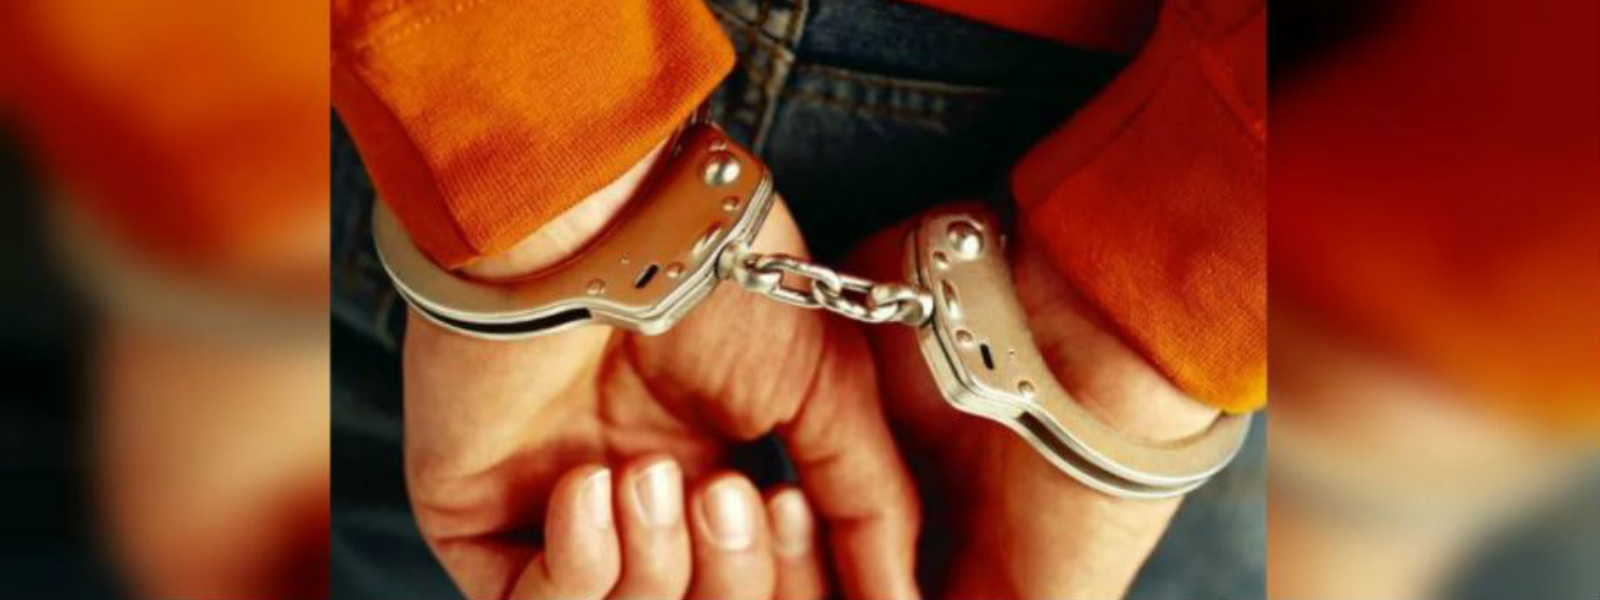 18 Arrested in Beruwala Over Non-Compliance of Infectious Disease Prevention Measures